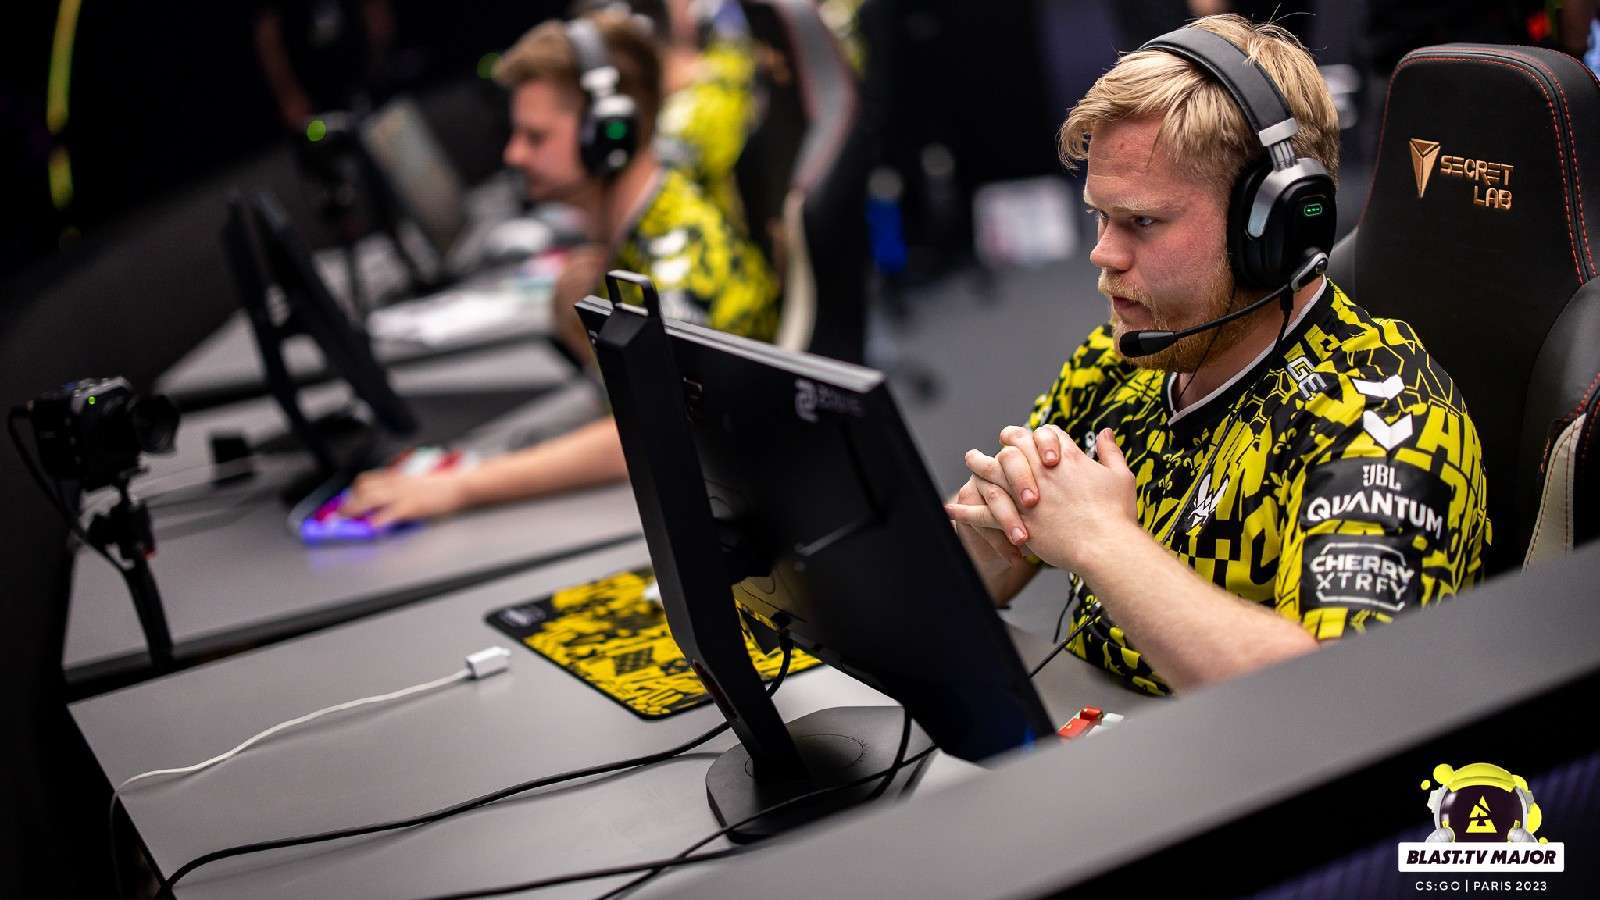 Falcons CS2 super team set to start with Magisk signing - Dexerto